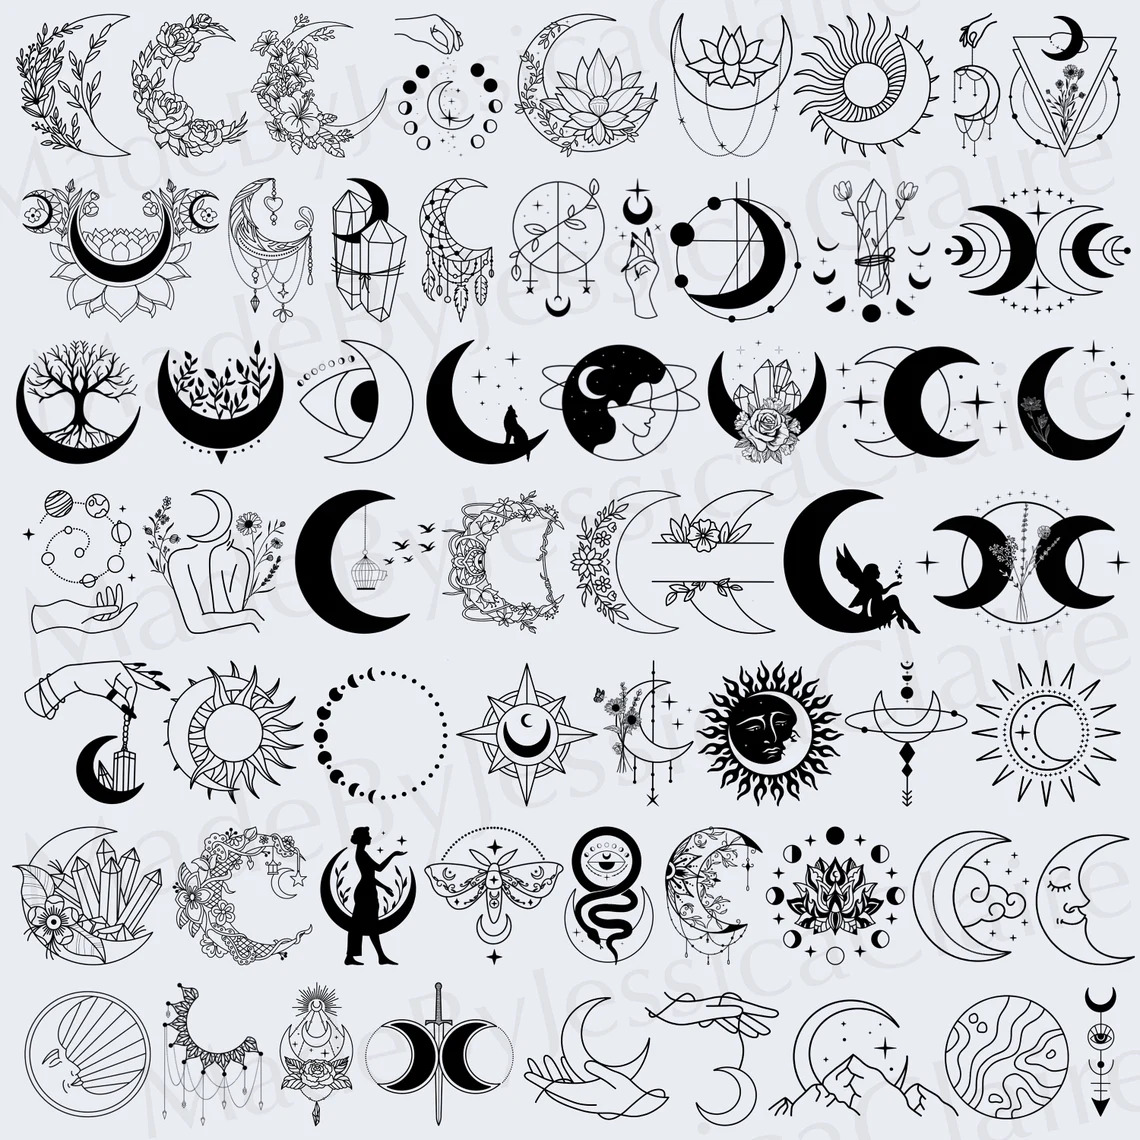 Many options for using crescent moon images.